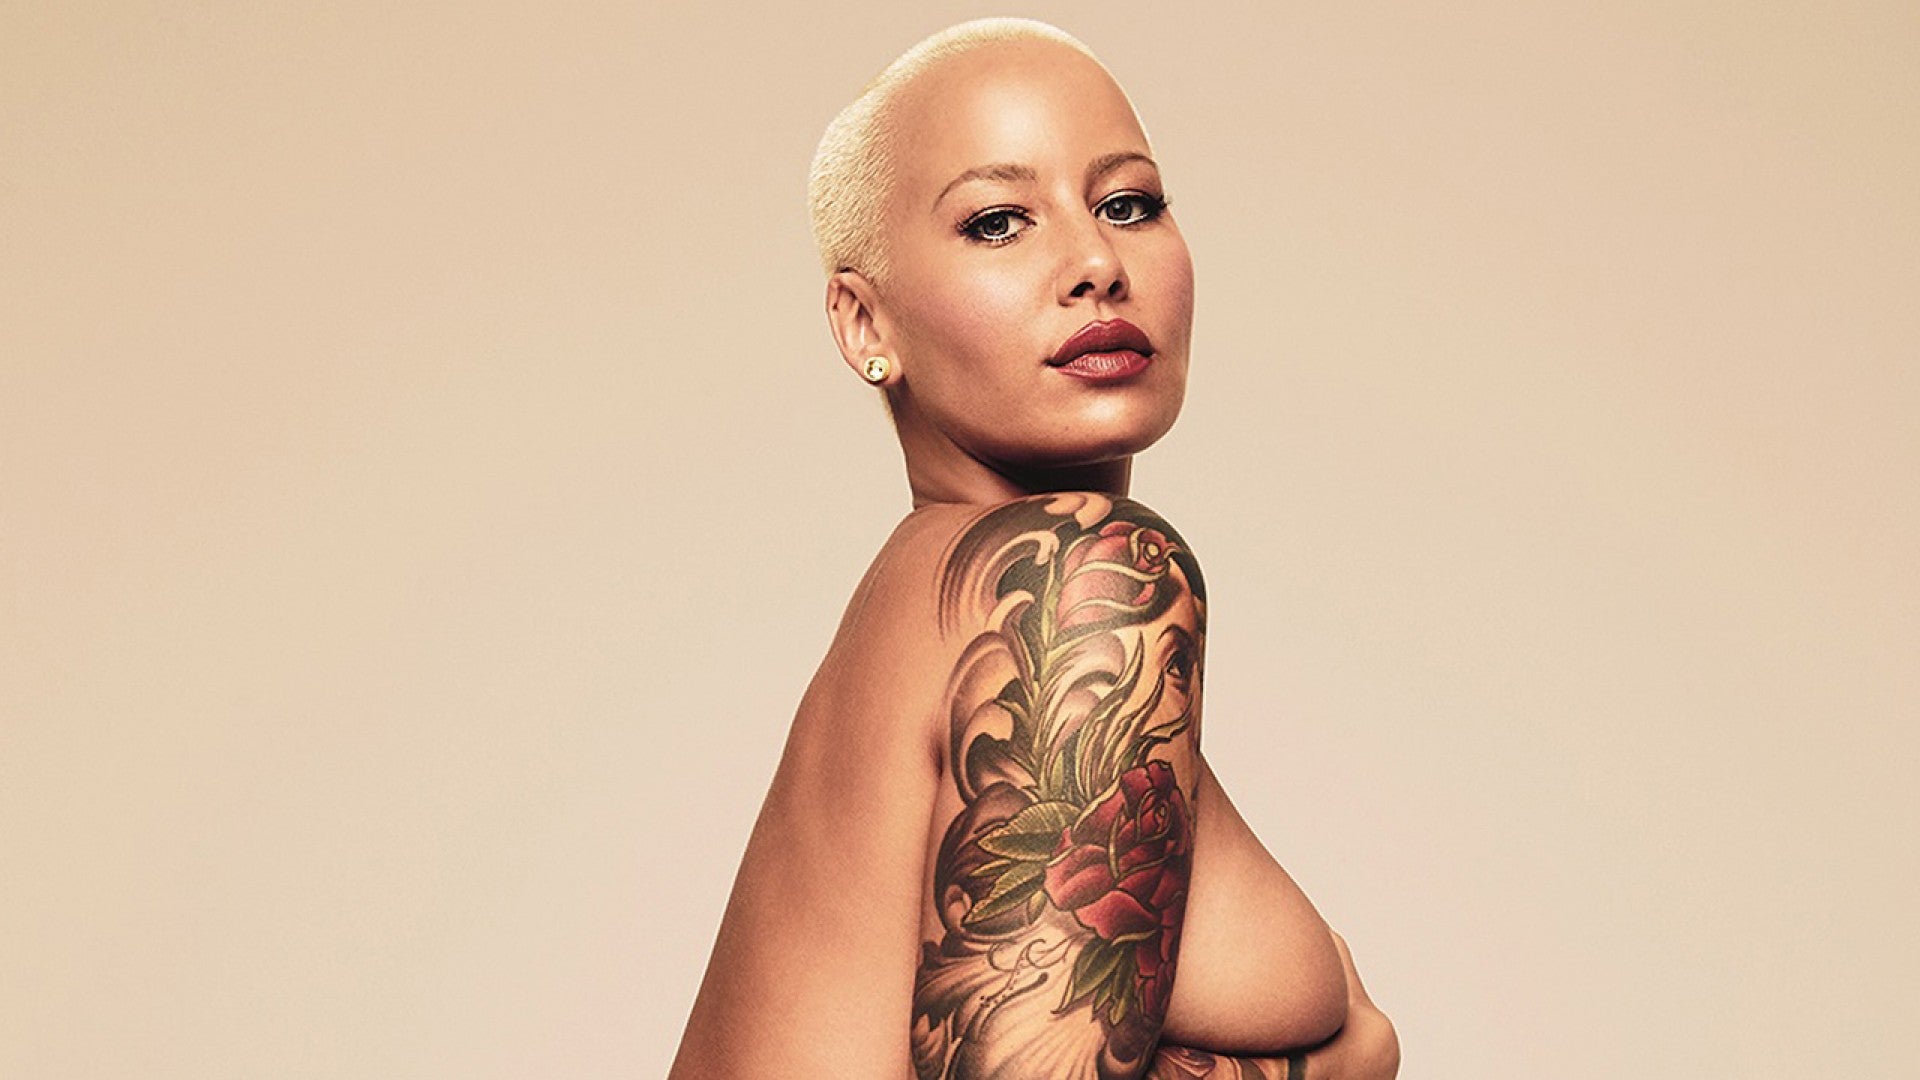 Amber rose thicc